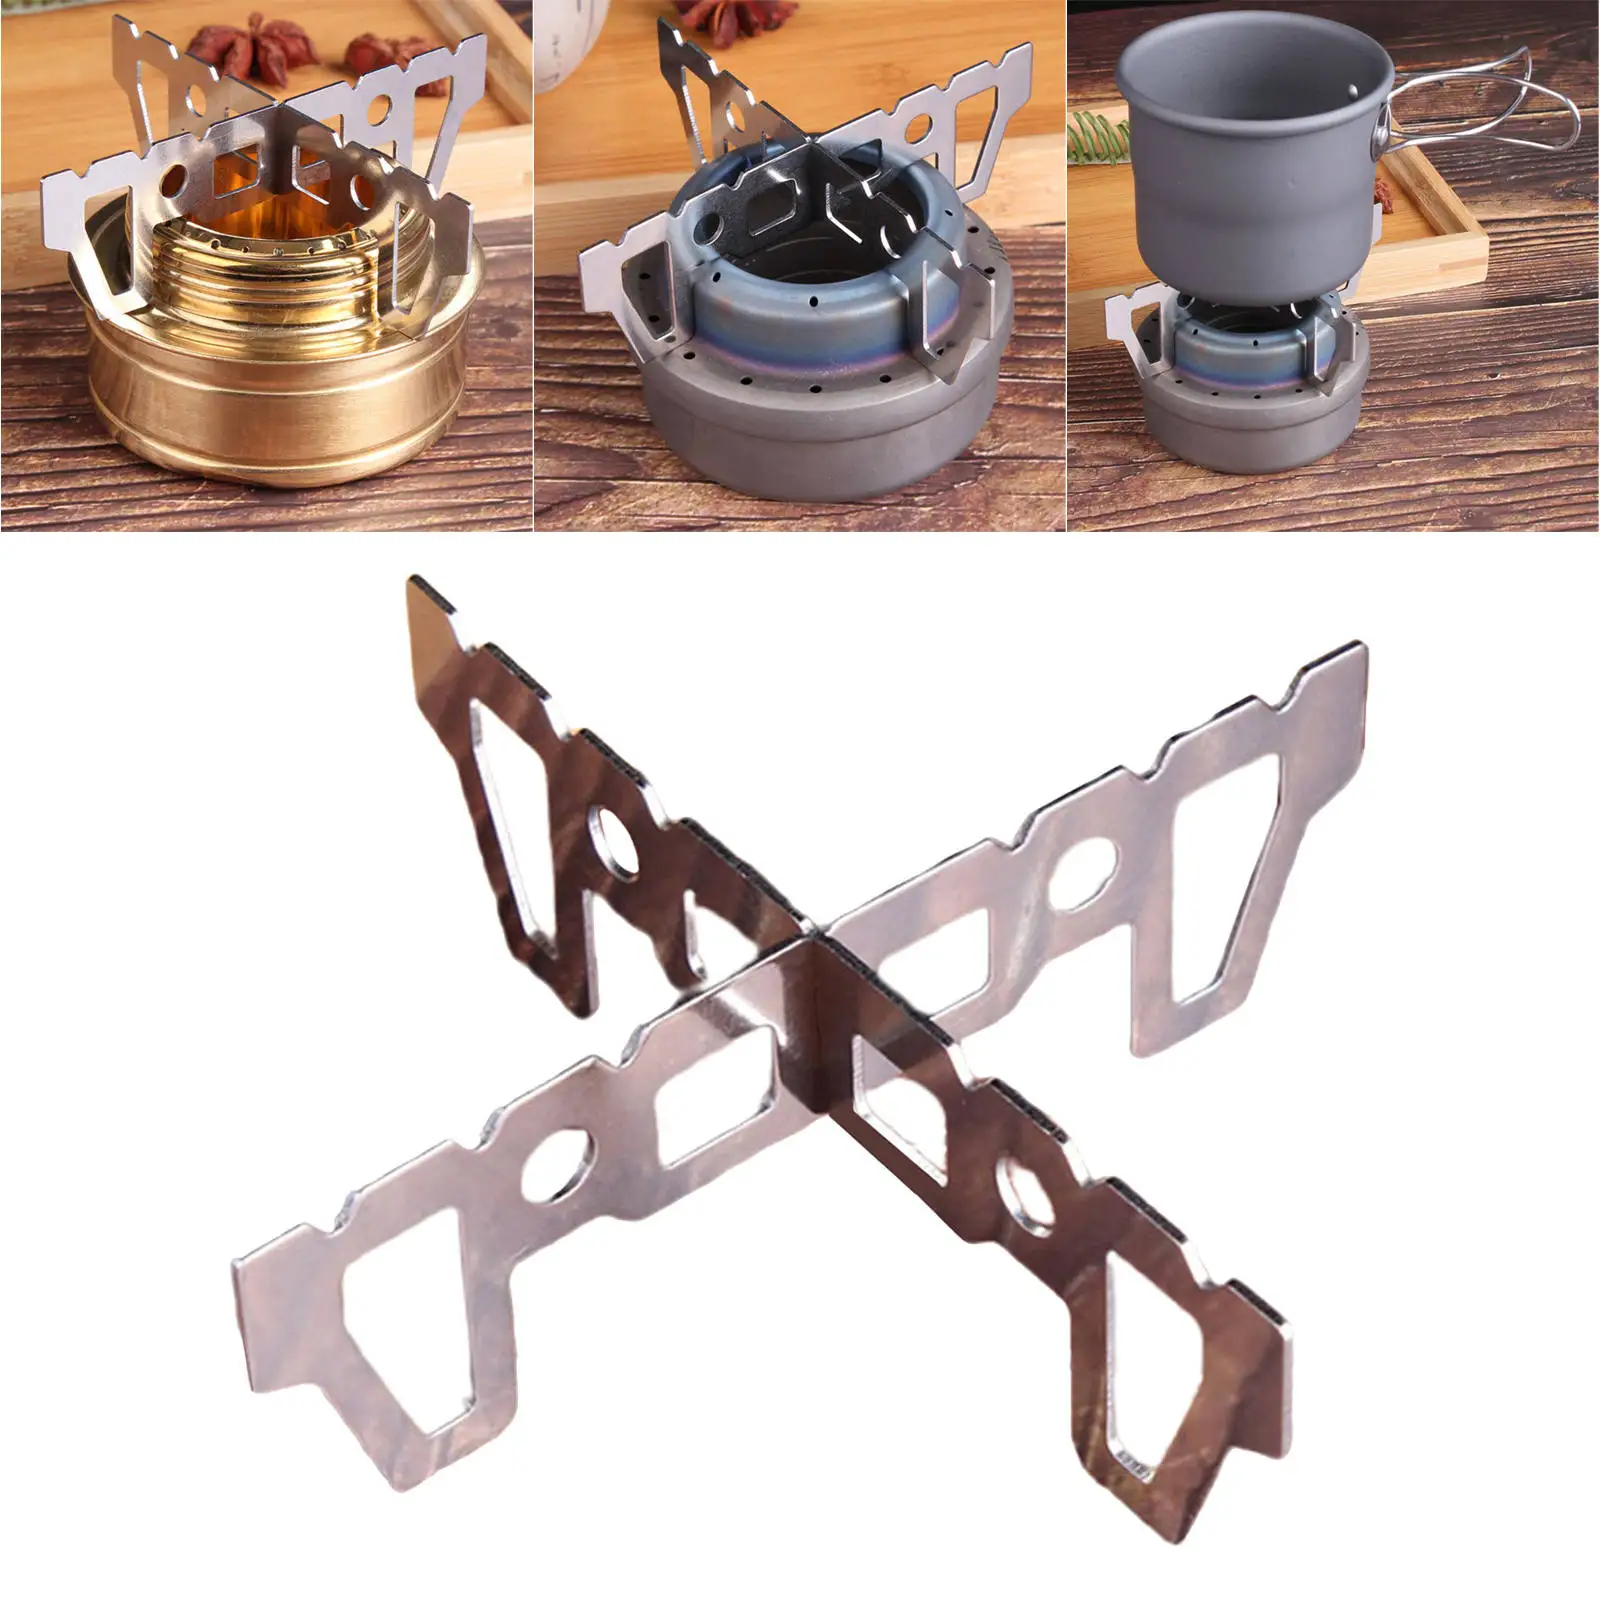 Titanium Alcohol Stove & Rack Combo Set Mini Ultralight Portable Liquid Alcohol Stove with Cross Stand Stove Rack Support Stand